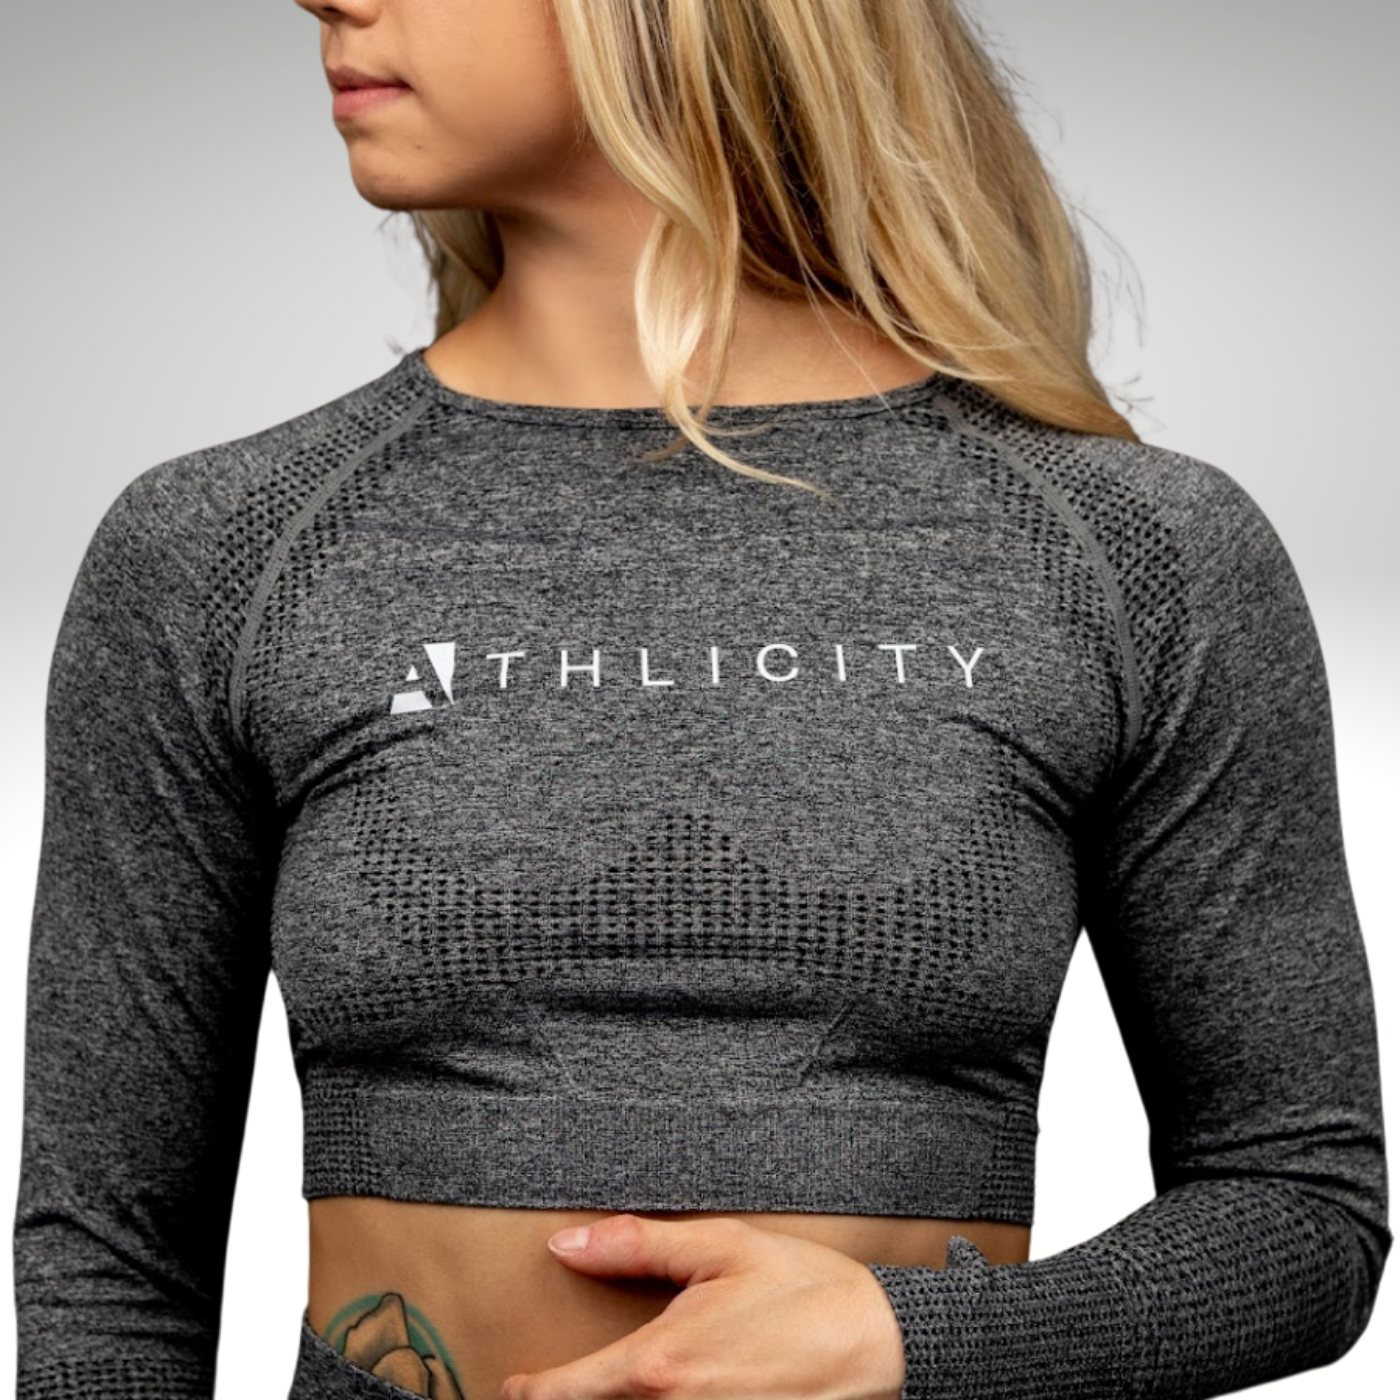 Athlicity Cropped Long Sleeve